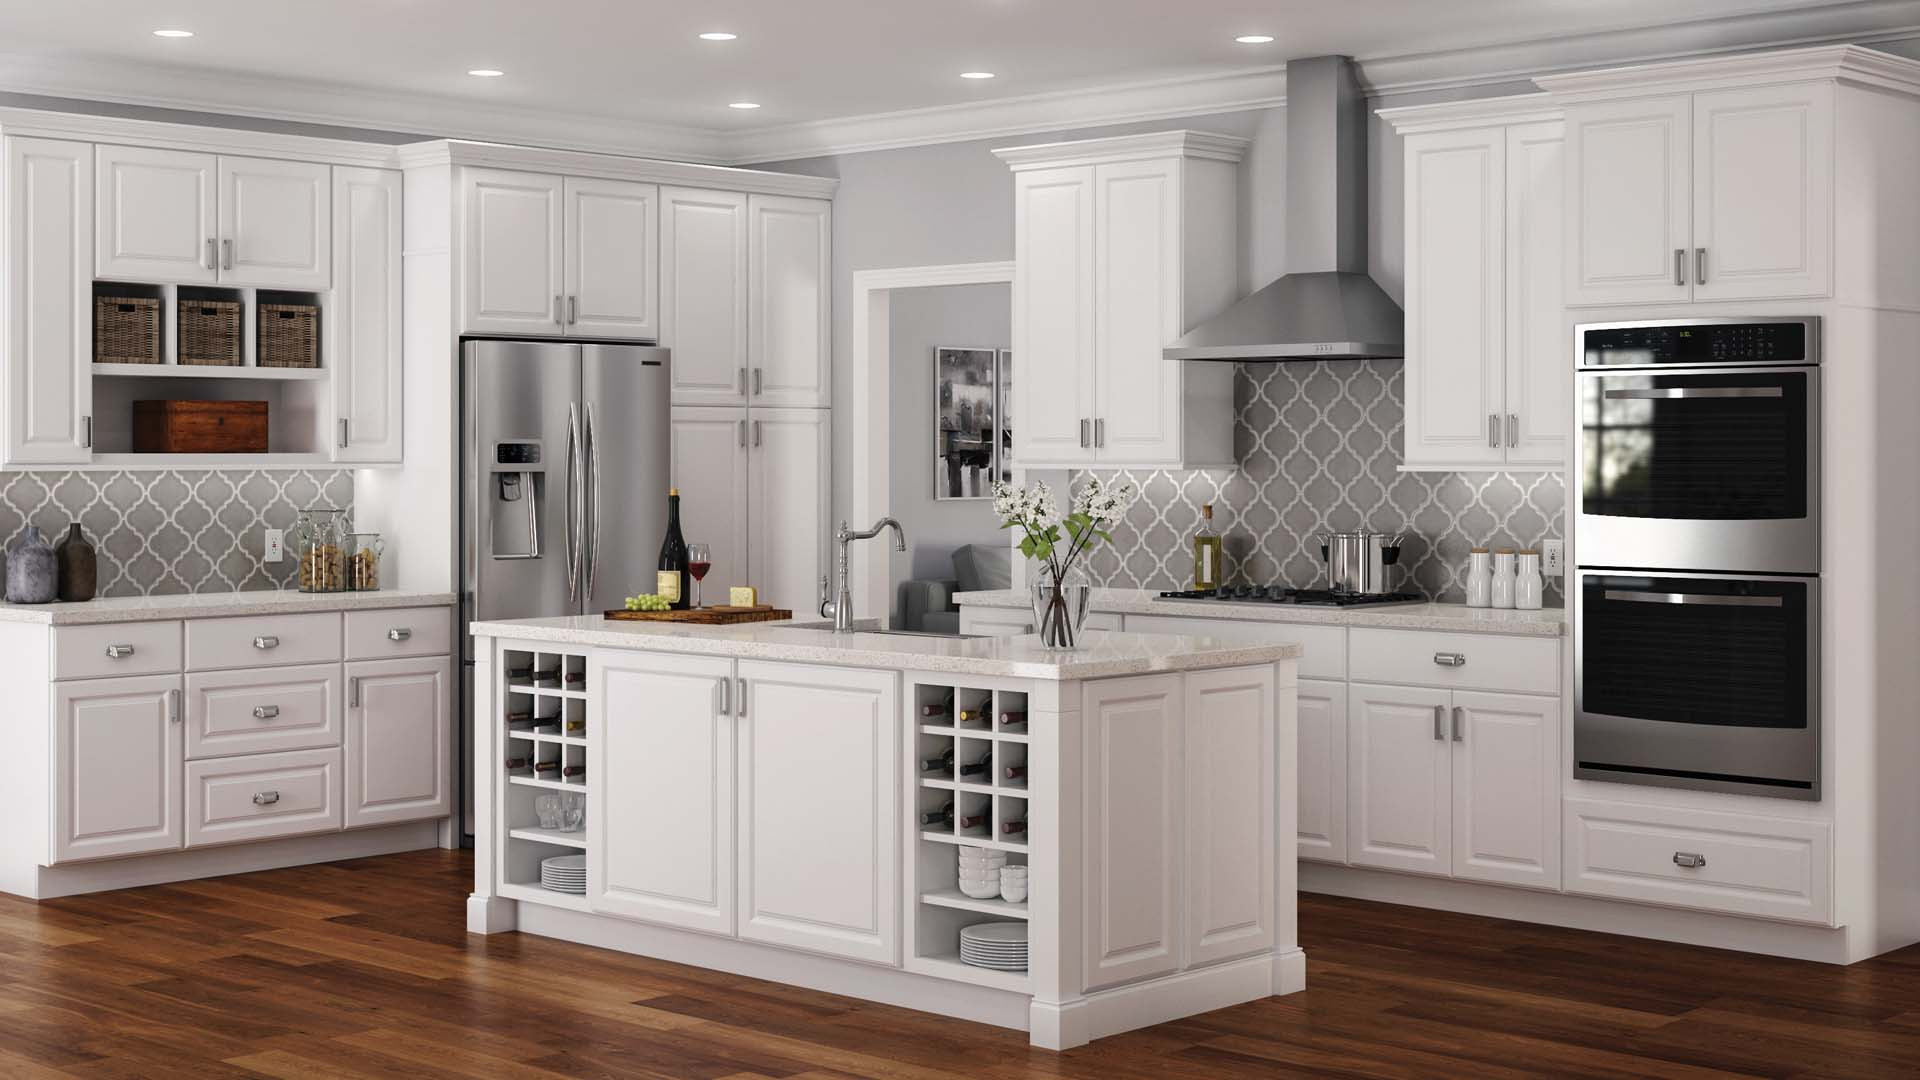 Homedepot Kitchen Cabinets
 Hampton Cabinet Accessories in White – Kitchen – The Home